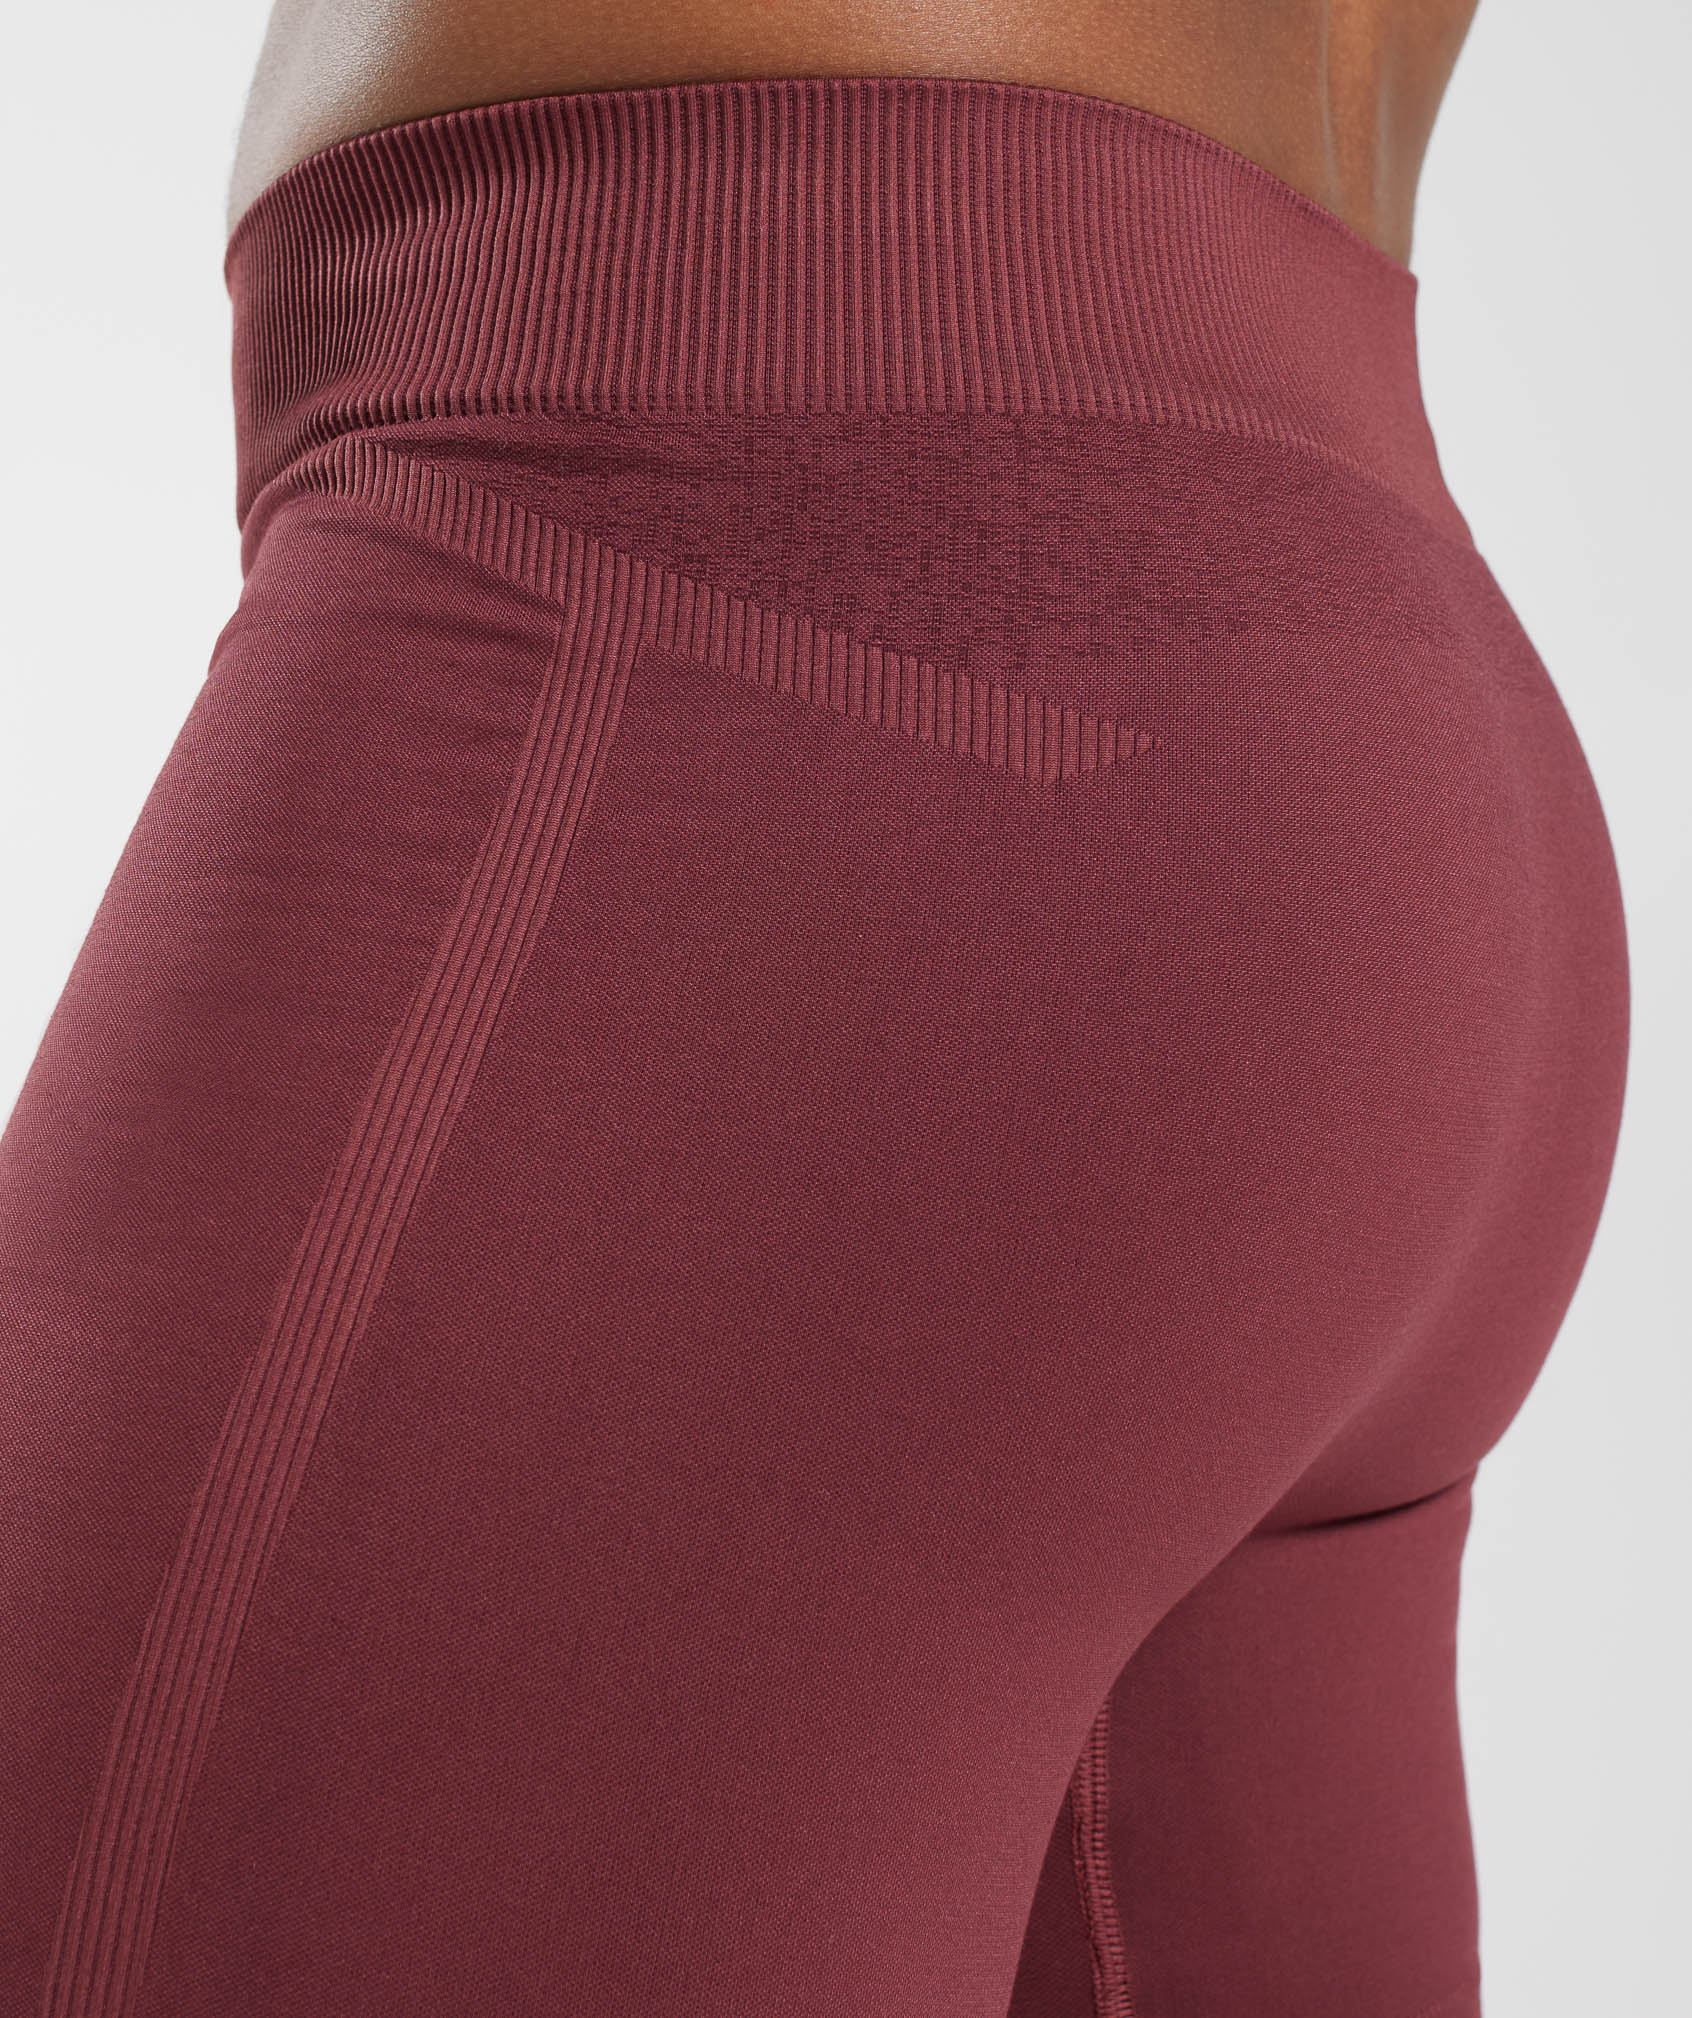 wolffindsavailable, ⇨𝒊𝒕𝒆𝒎: Gymshark cherry brown apex seamless shorts  🤎 ⇨𝒄𝒐𝒏𝒅𝒊𝒕𝒊𝒐𝒏: brand new ⇨𝒔𝒊𝒛�